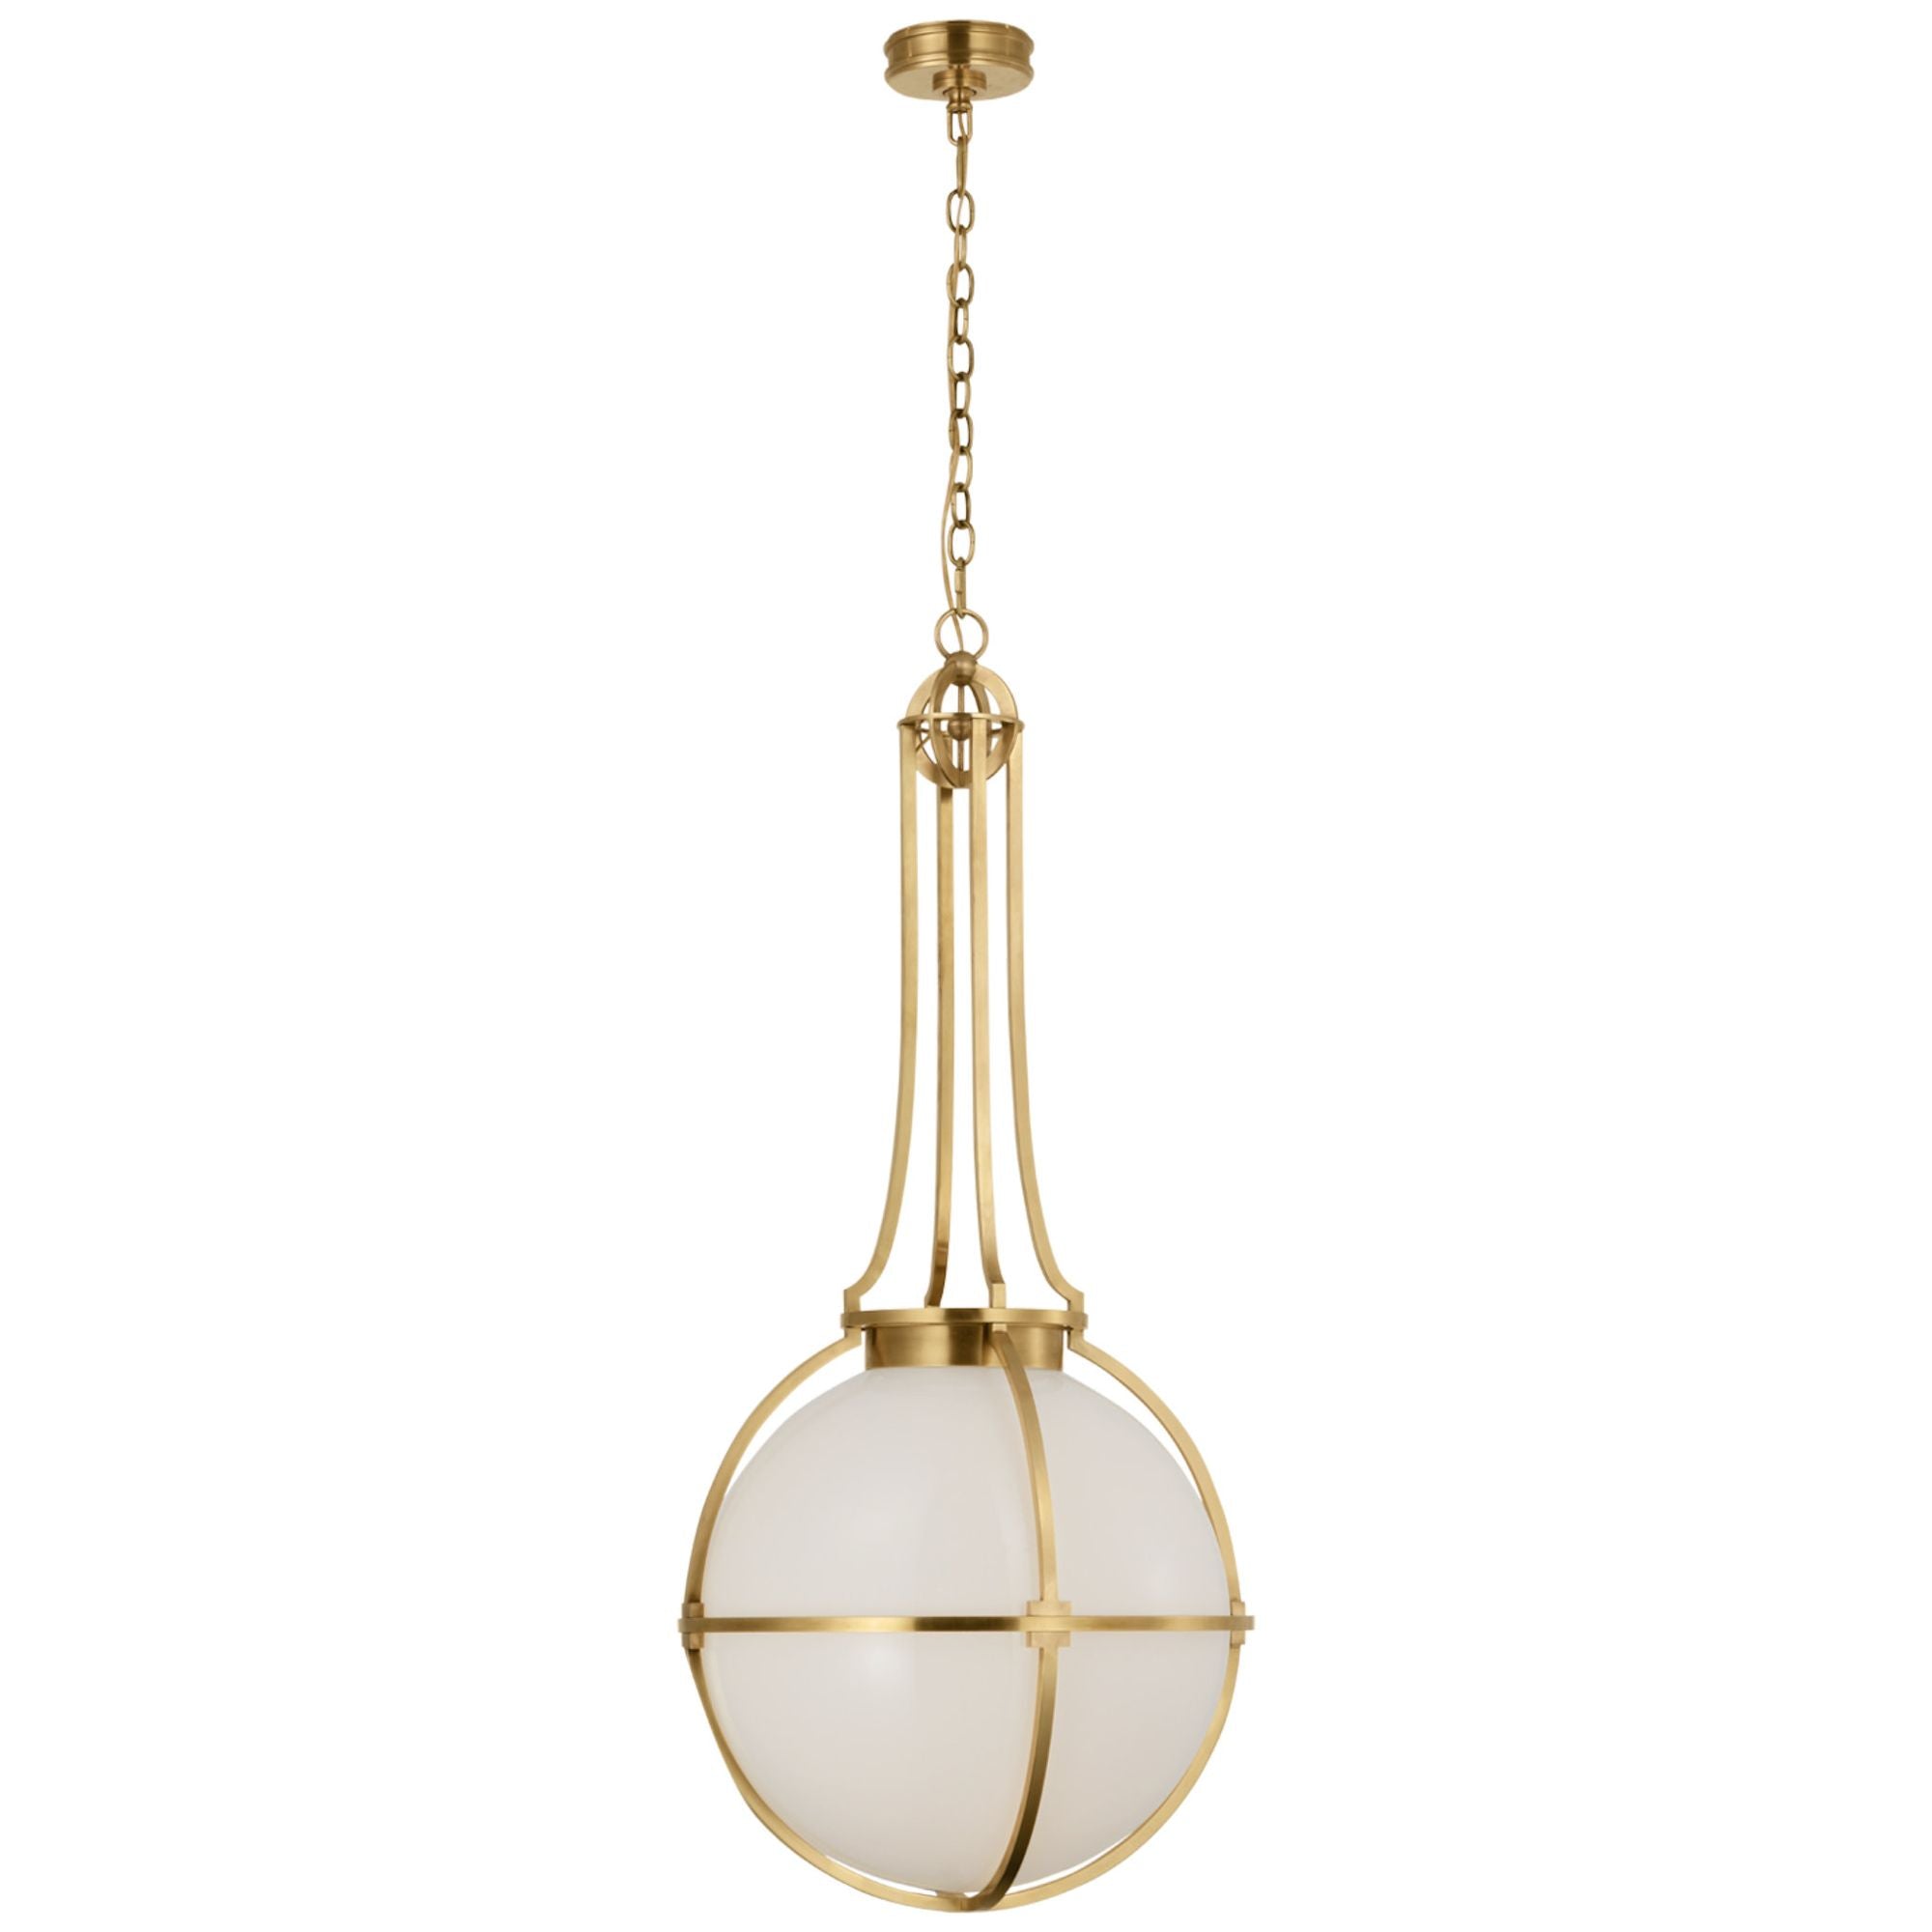 Chapman & Myers Gracie Large Captured Globe Pendant in Antique-Burnished Brass with White Glass